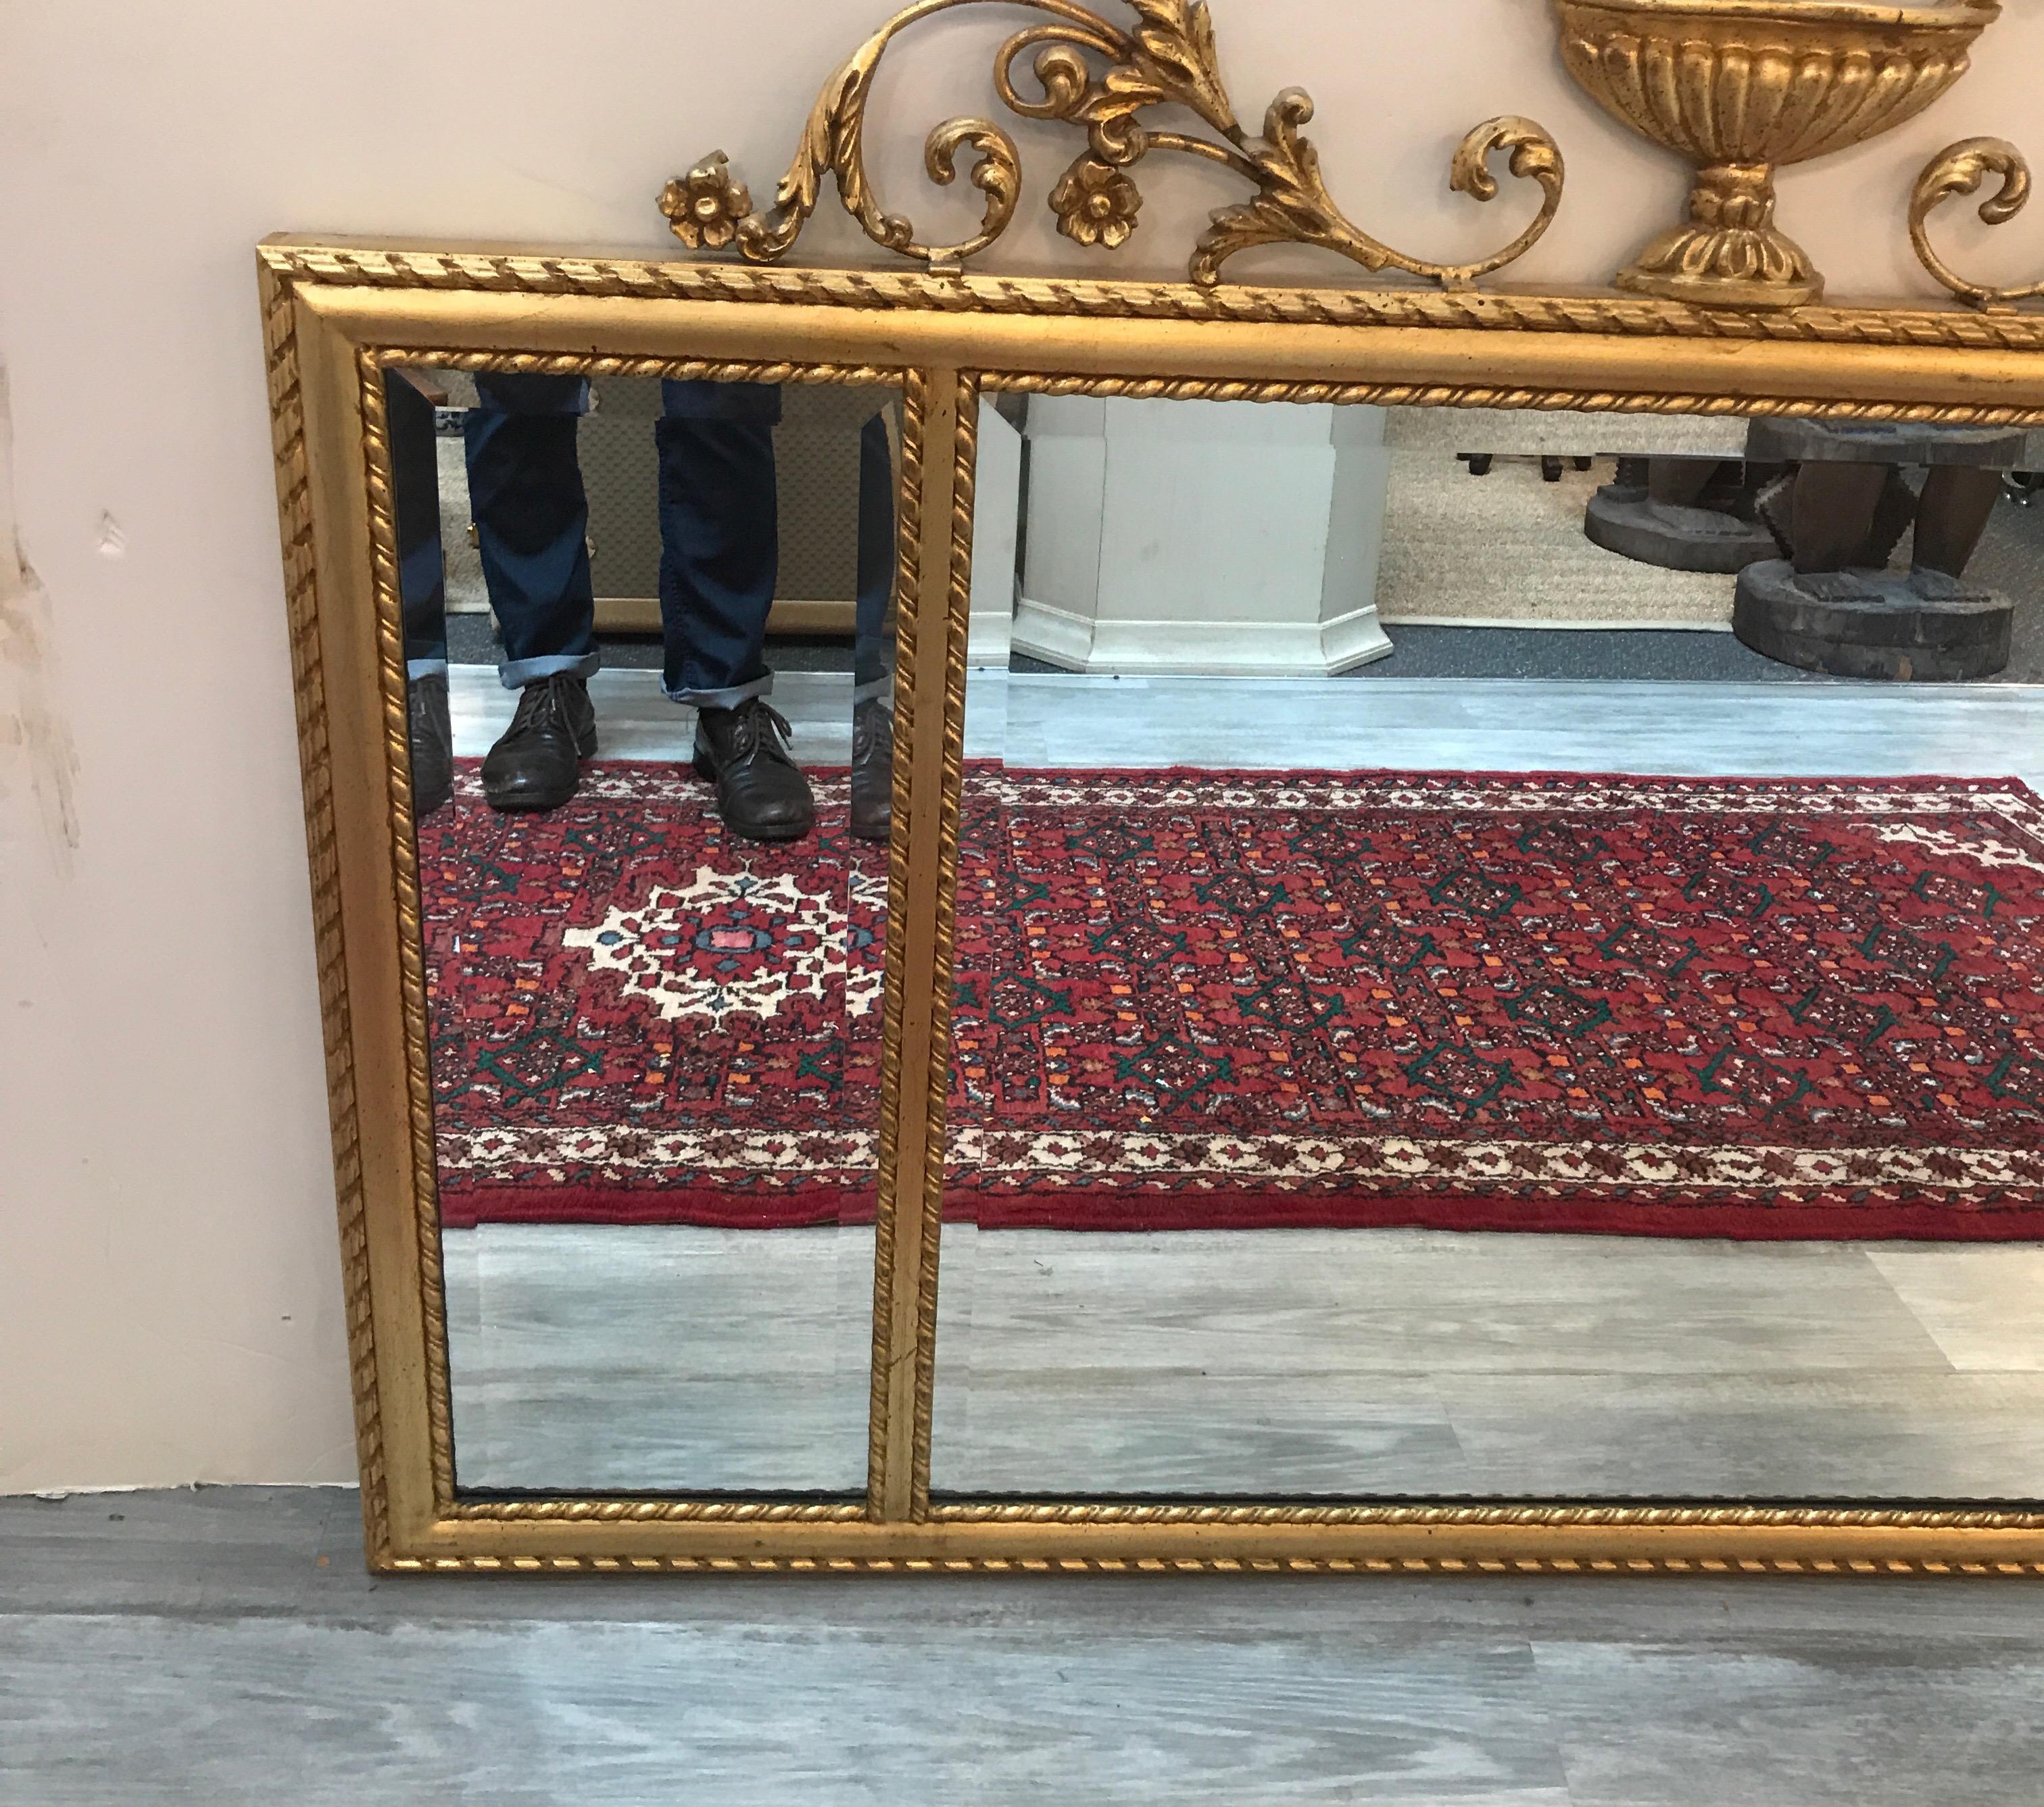 An elegant Italian made giltwood mirror by Labarge. The three section mirror with beveled edges surrounded by an elaborate English Adam Style frame. The urn pediment with scrolling foliate details with gadrooned edge on the edges.